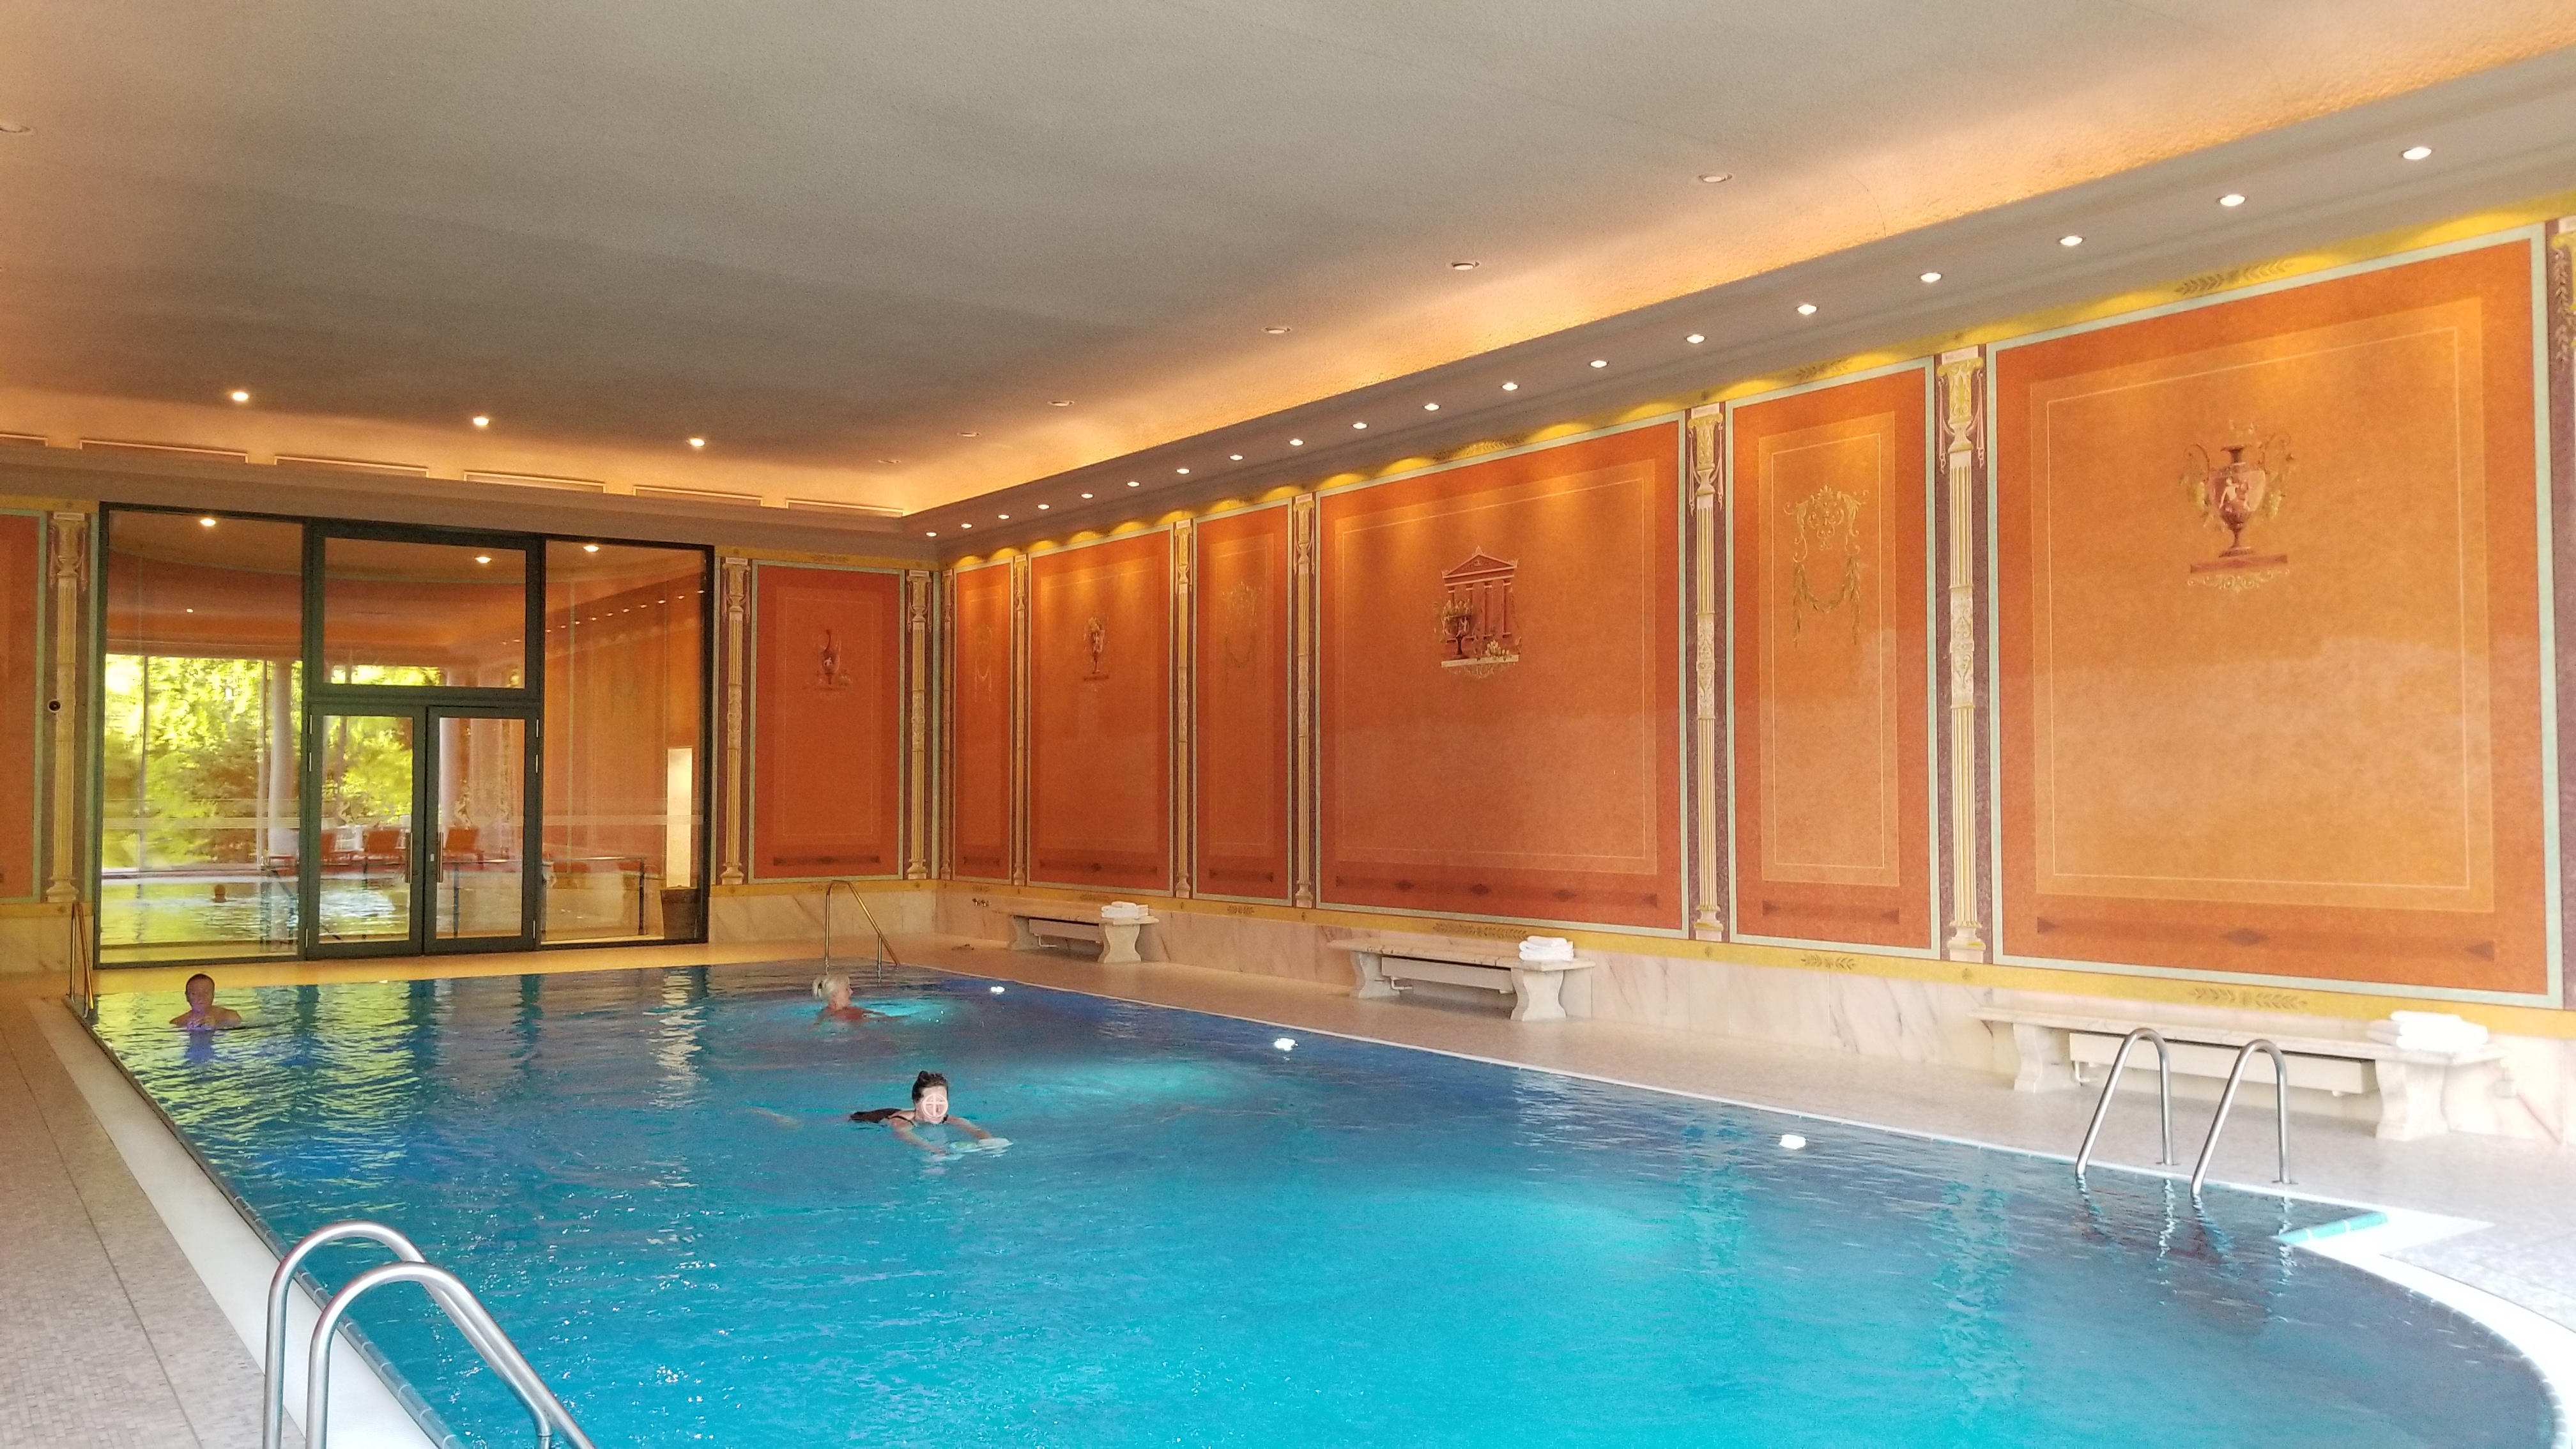 Beautiful frescoes decorate the indoor pool at the Brenners Park-Hotel in Baden-Baden.